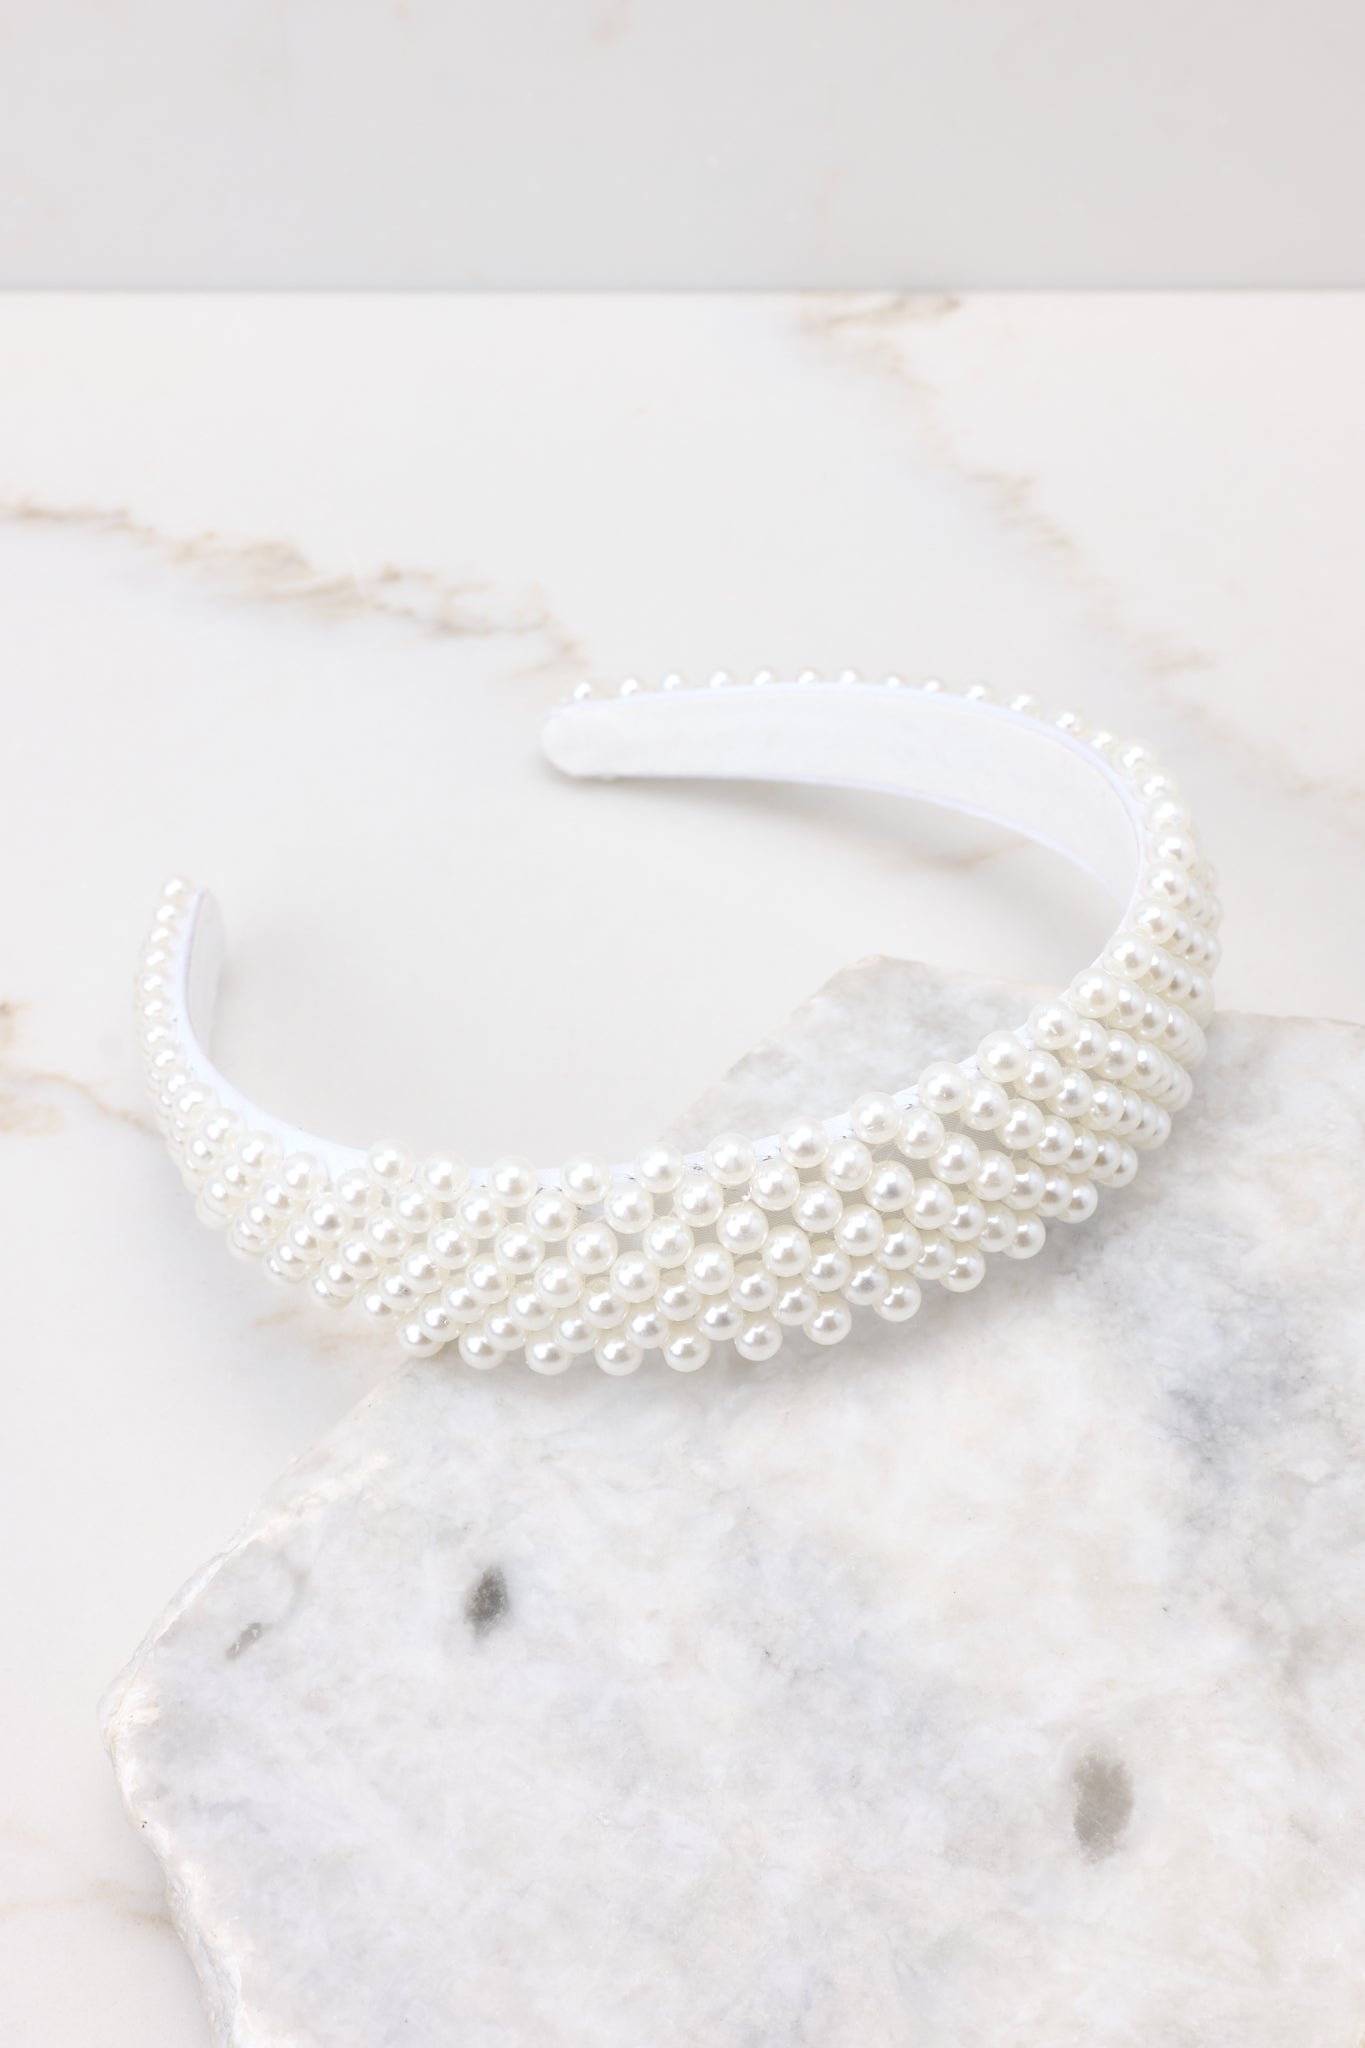 Top view of this headband that features a flexible design with pearl embellishments throughout.